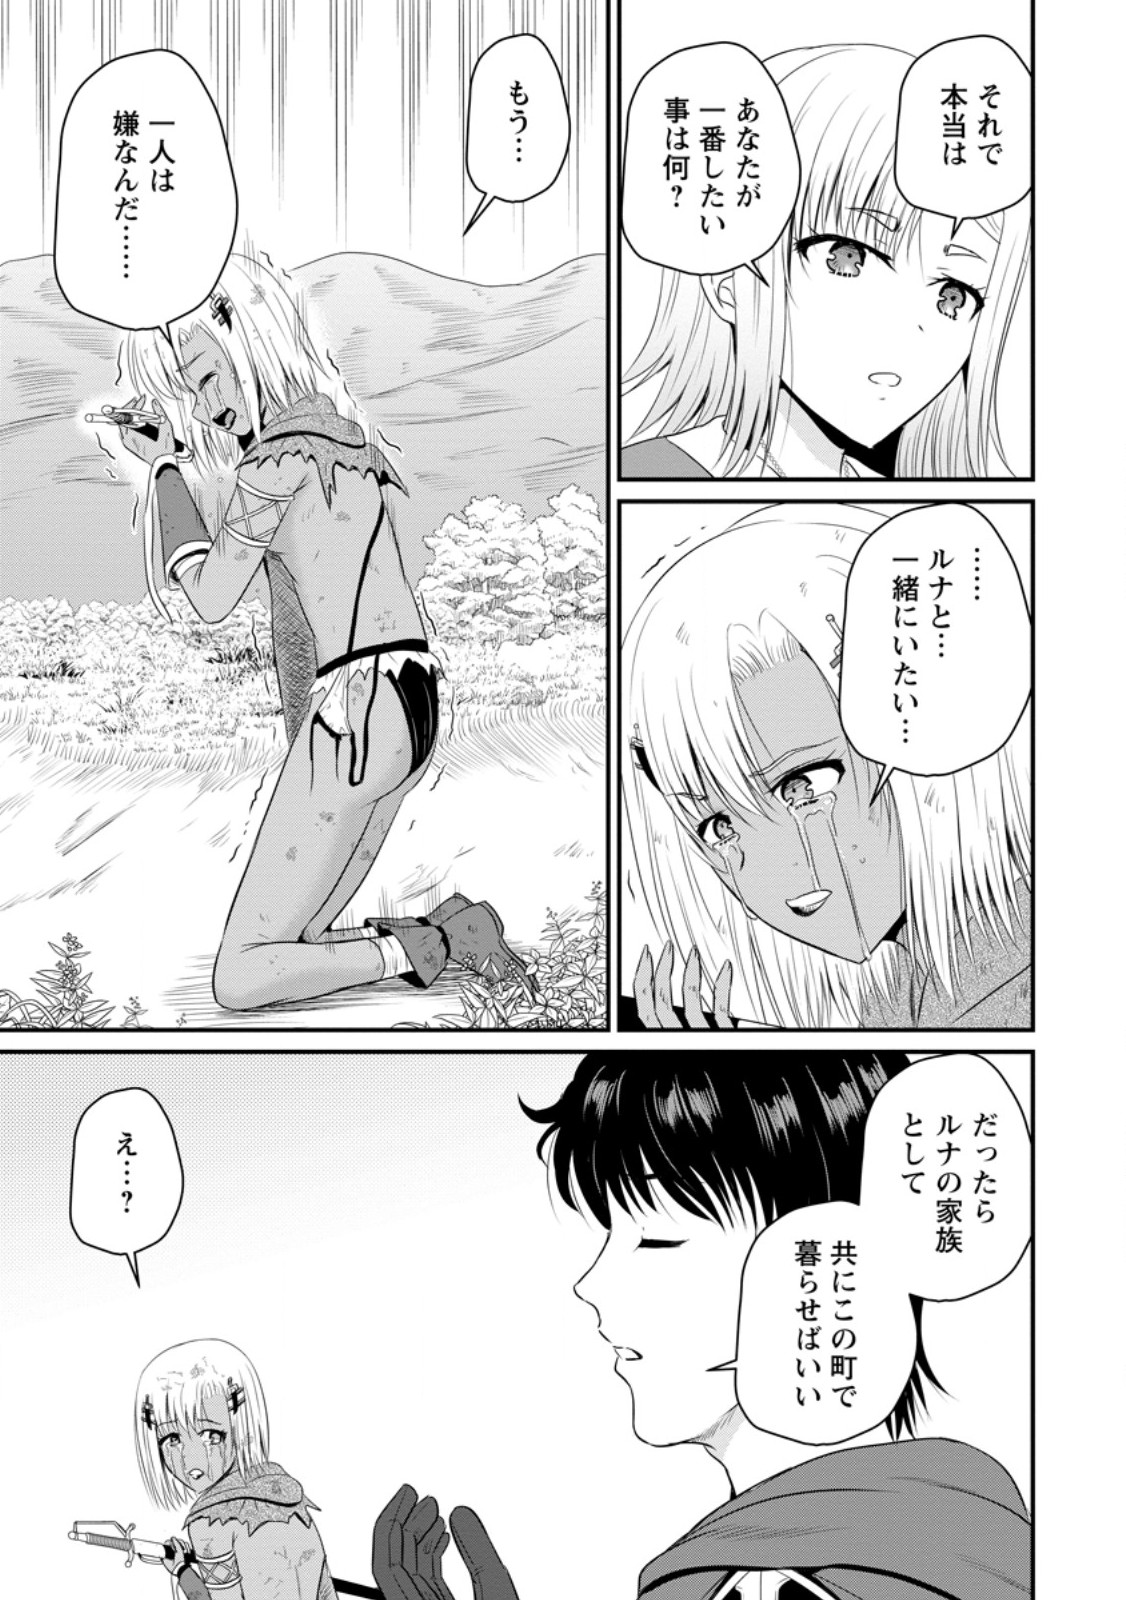 The Frontier Life of The Low-Class Ossan Healer And The Lovery Girl - Chapter 47.1 - Page 9